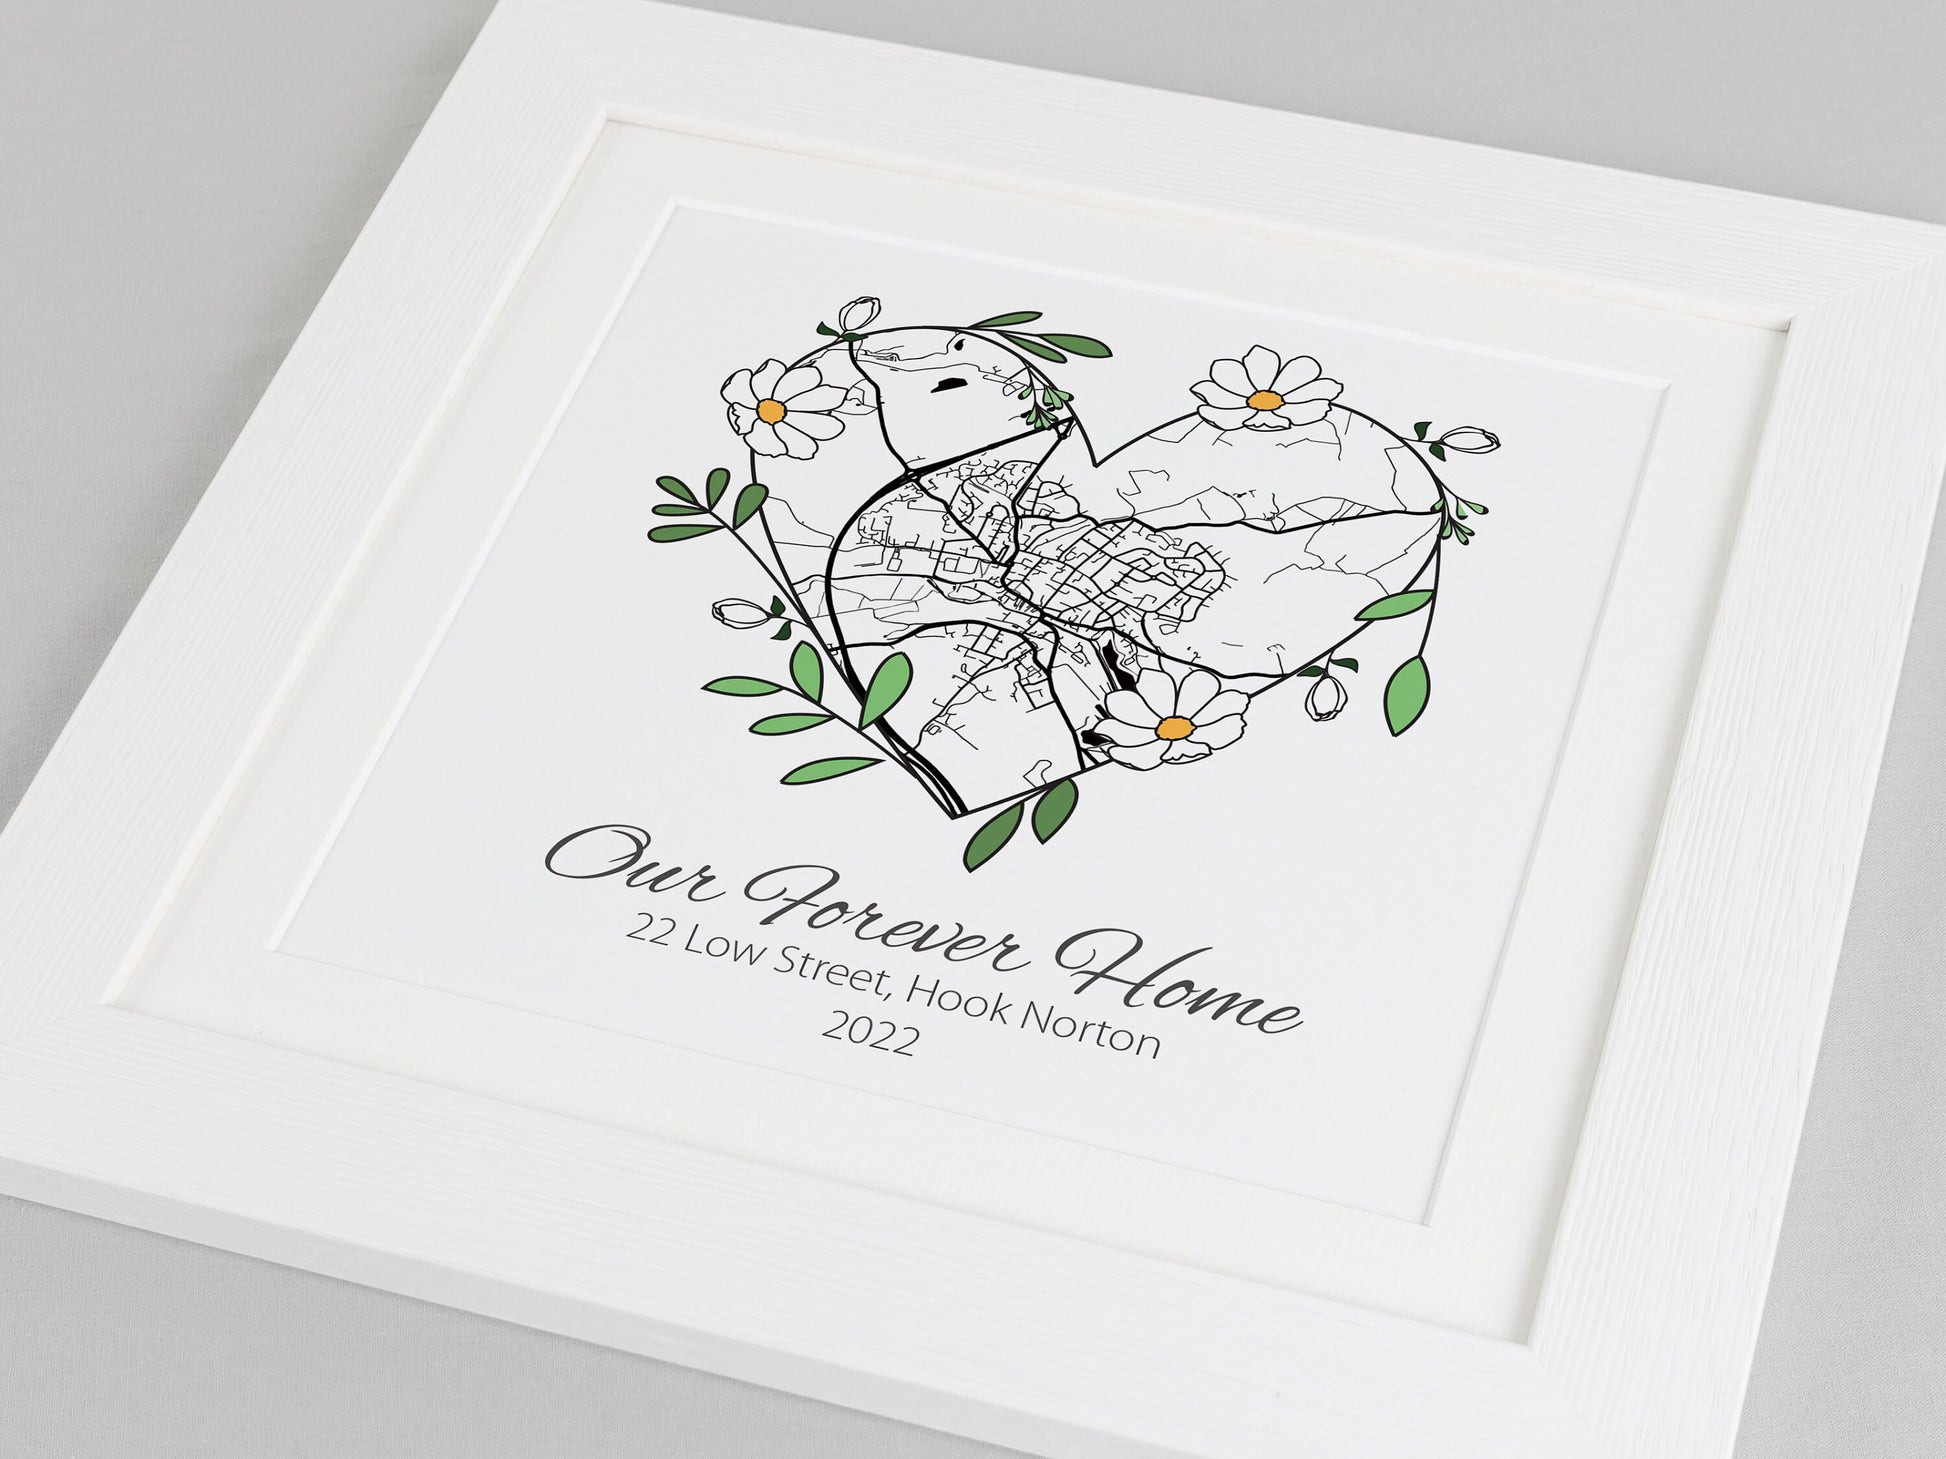 Special place floral map print | Wedding anniversary present | First met location | Where we live print | Special place keepsake VA148